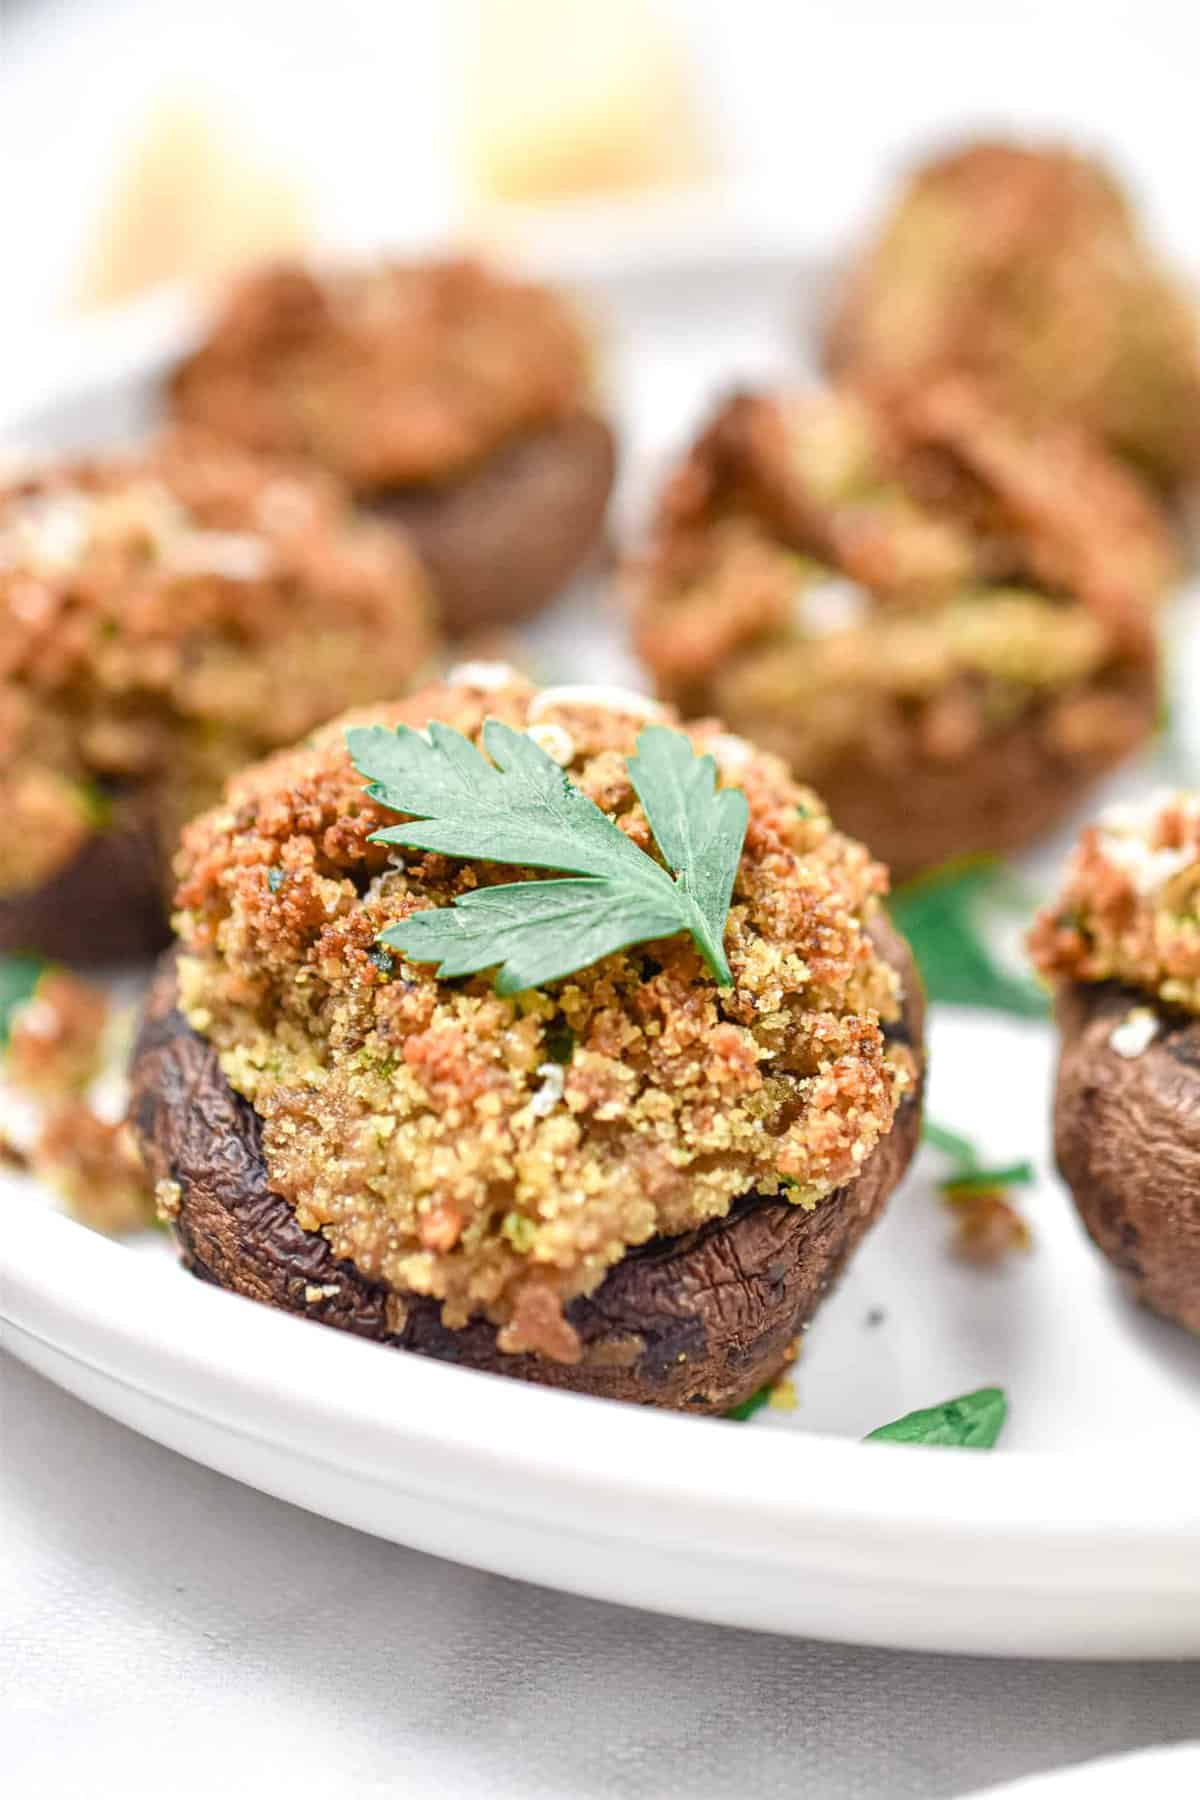 Close up of Italian stuffed mushrooms with a parsley leaf garnished on top of one.